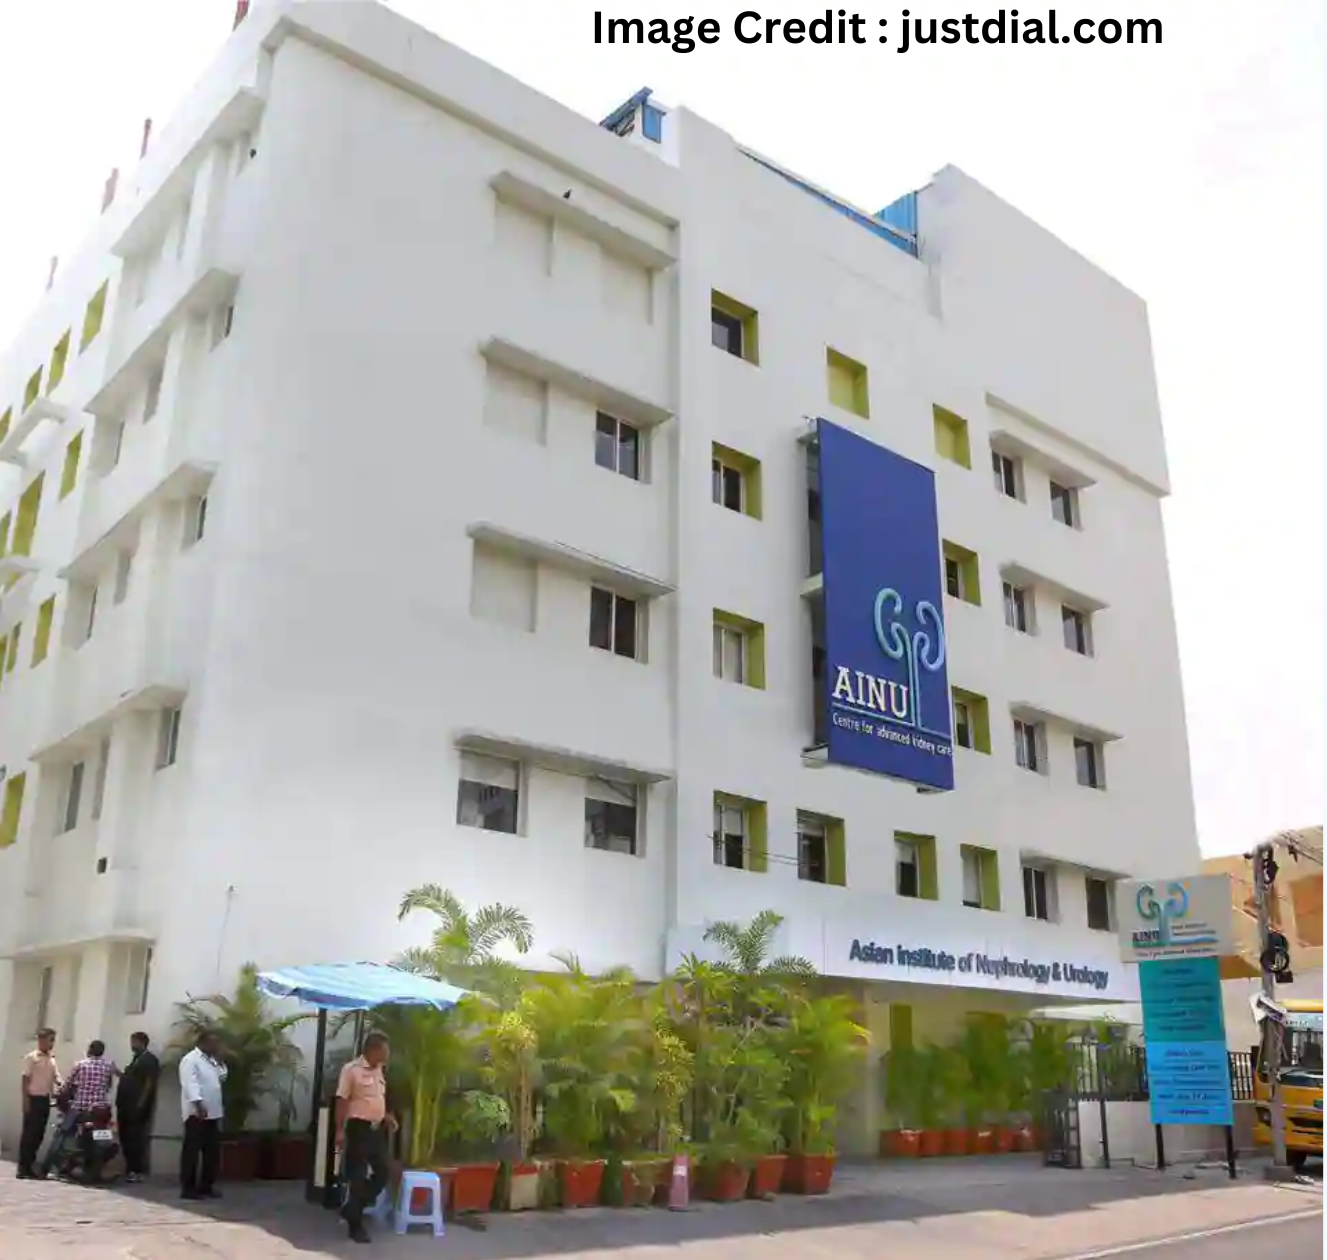 Asian Institute of Nephrology and Urology hyderabad